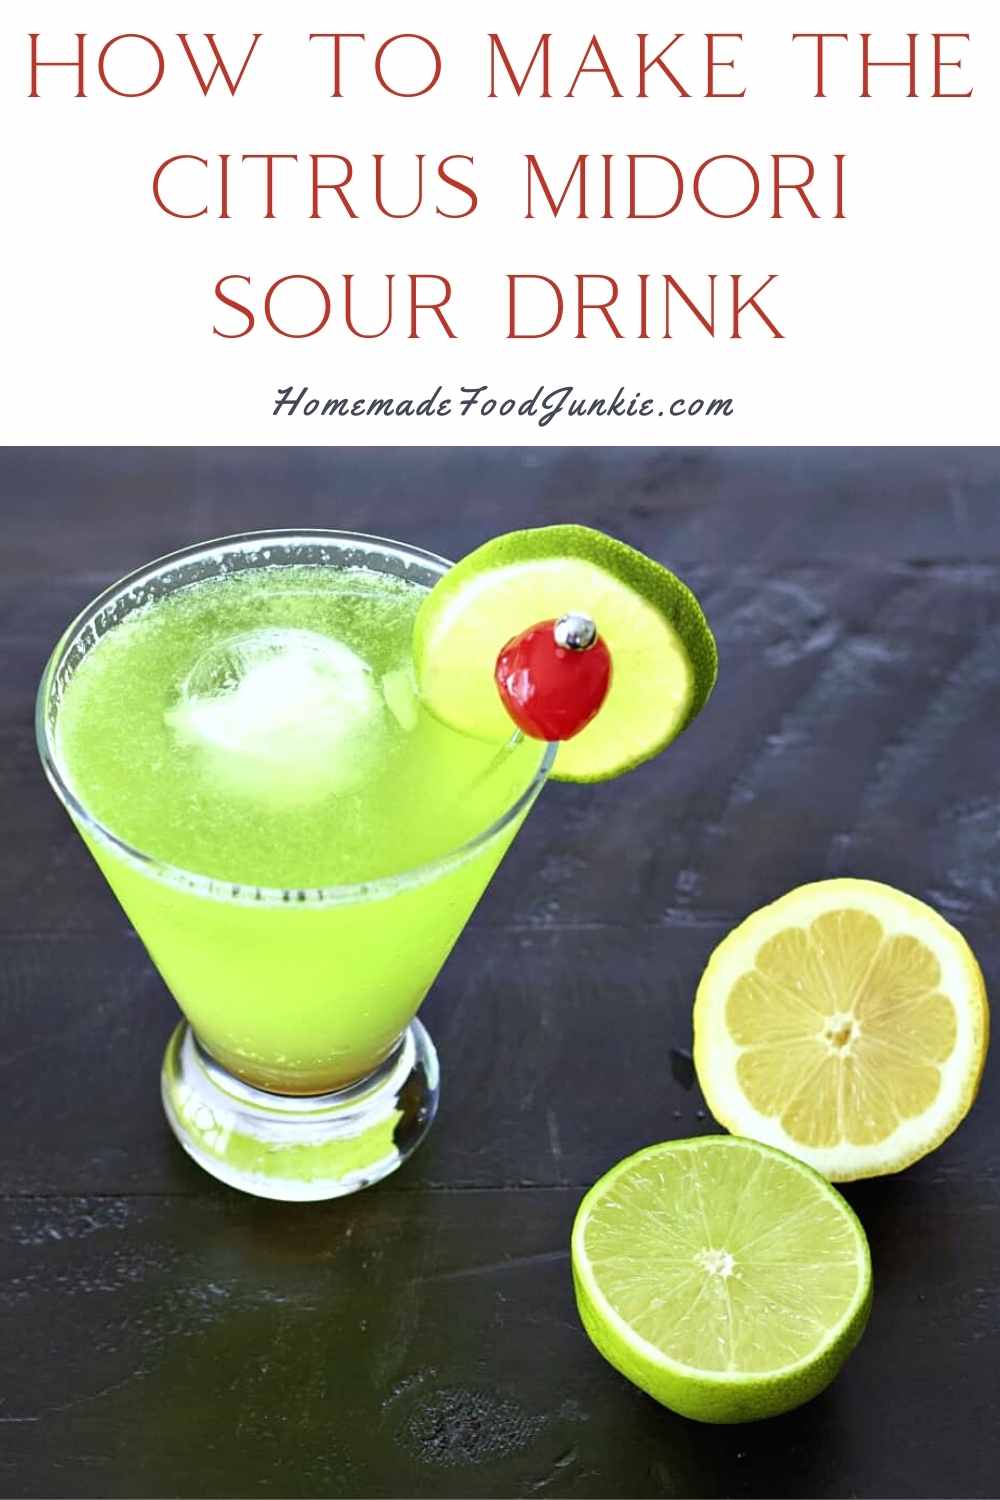 How To Make The Citrus Midori Sour Drink-Pin Image